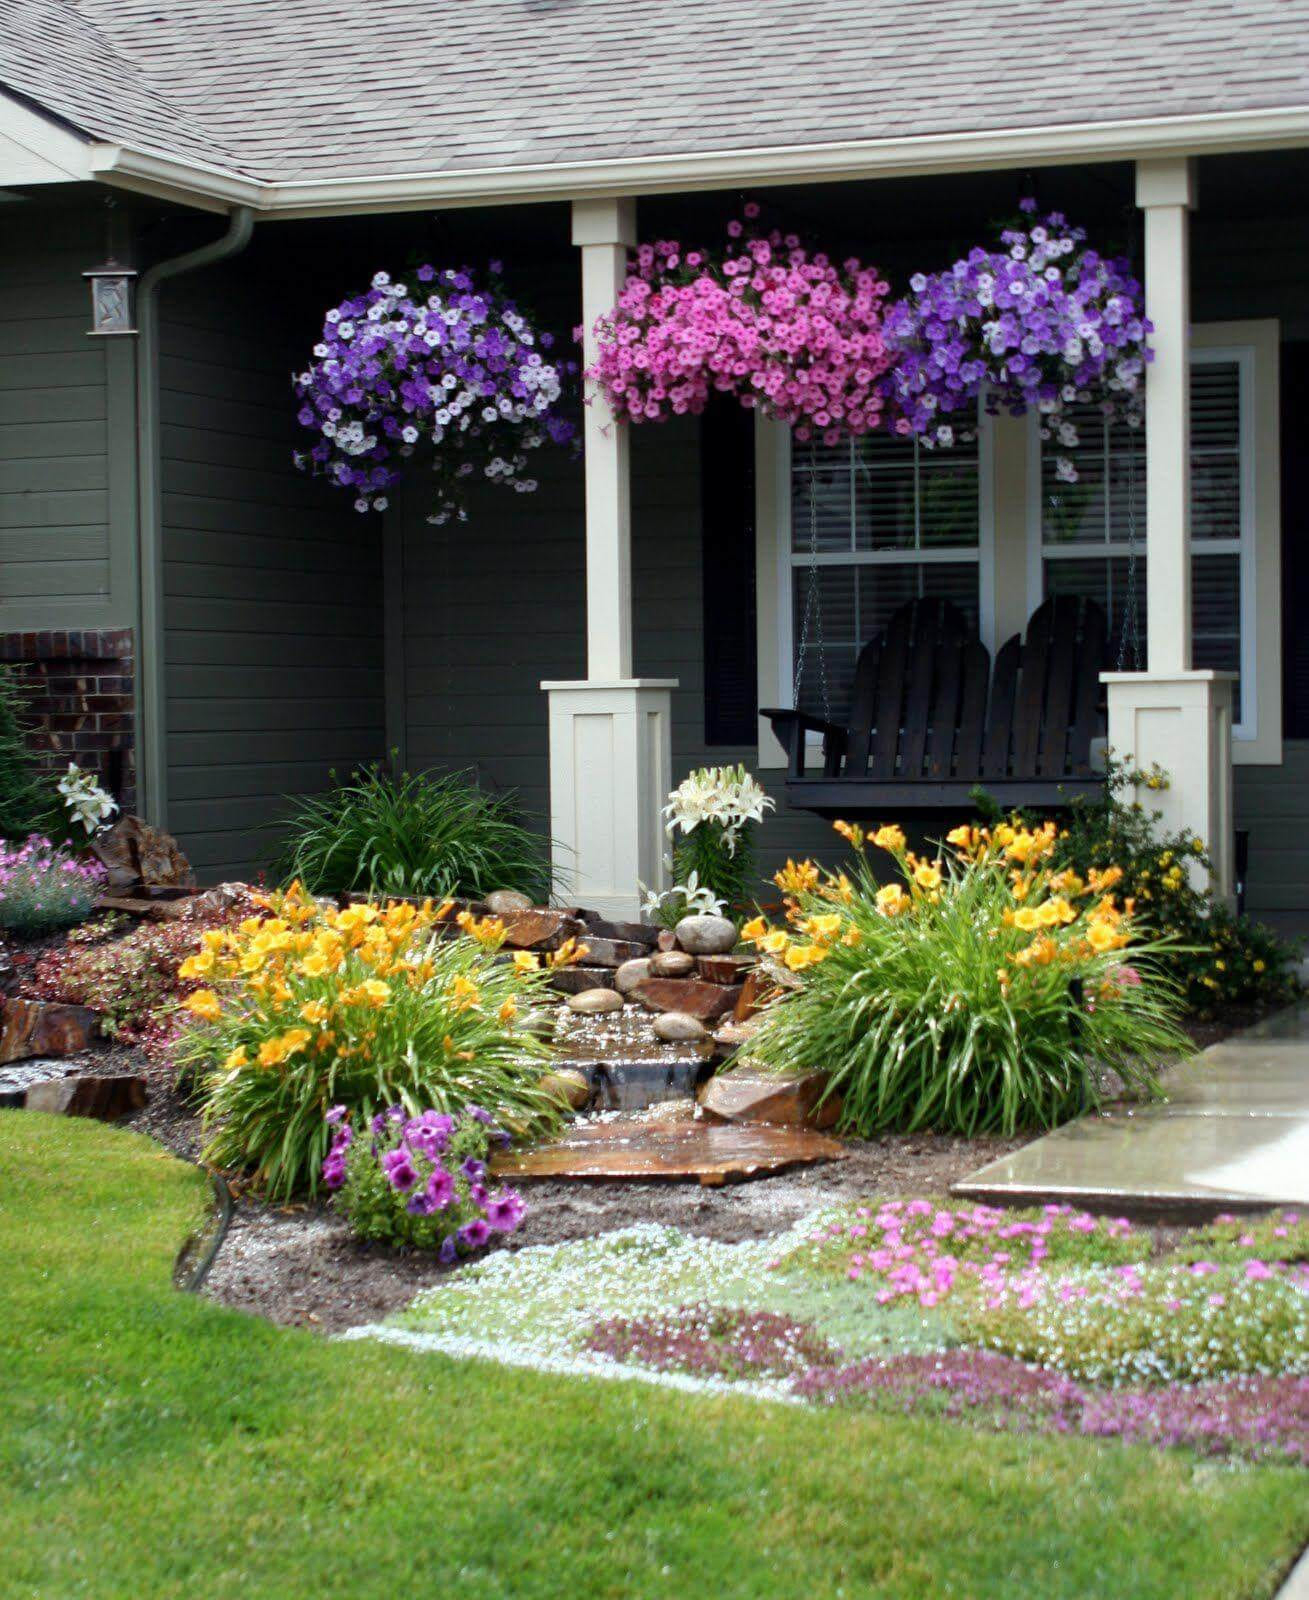 Simphome.com front yard landscaping ideas and garden designs for 2020 2021 regarding gardening ideas for front yard